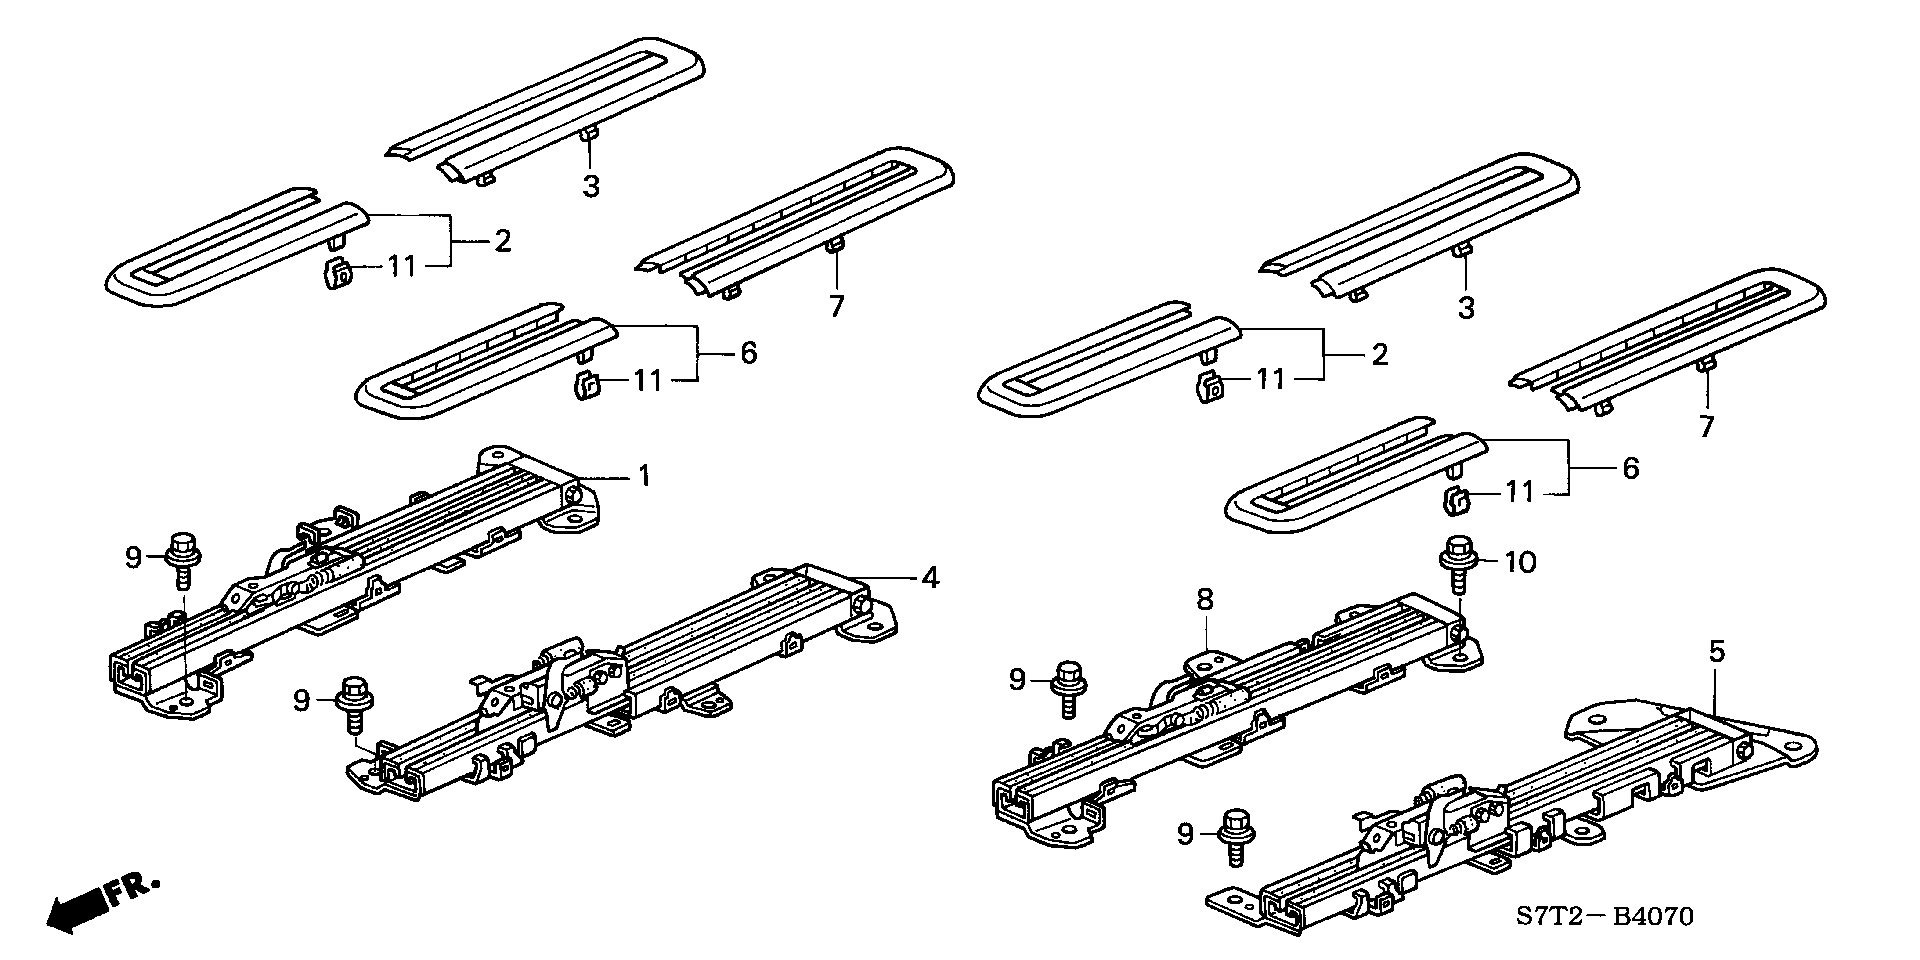 MIDDLE SEAT SHORT PARTS ( BENCH SEAT)